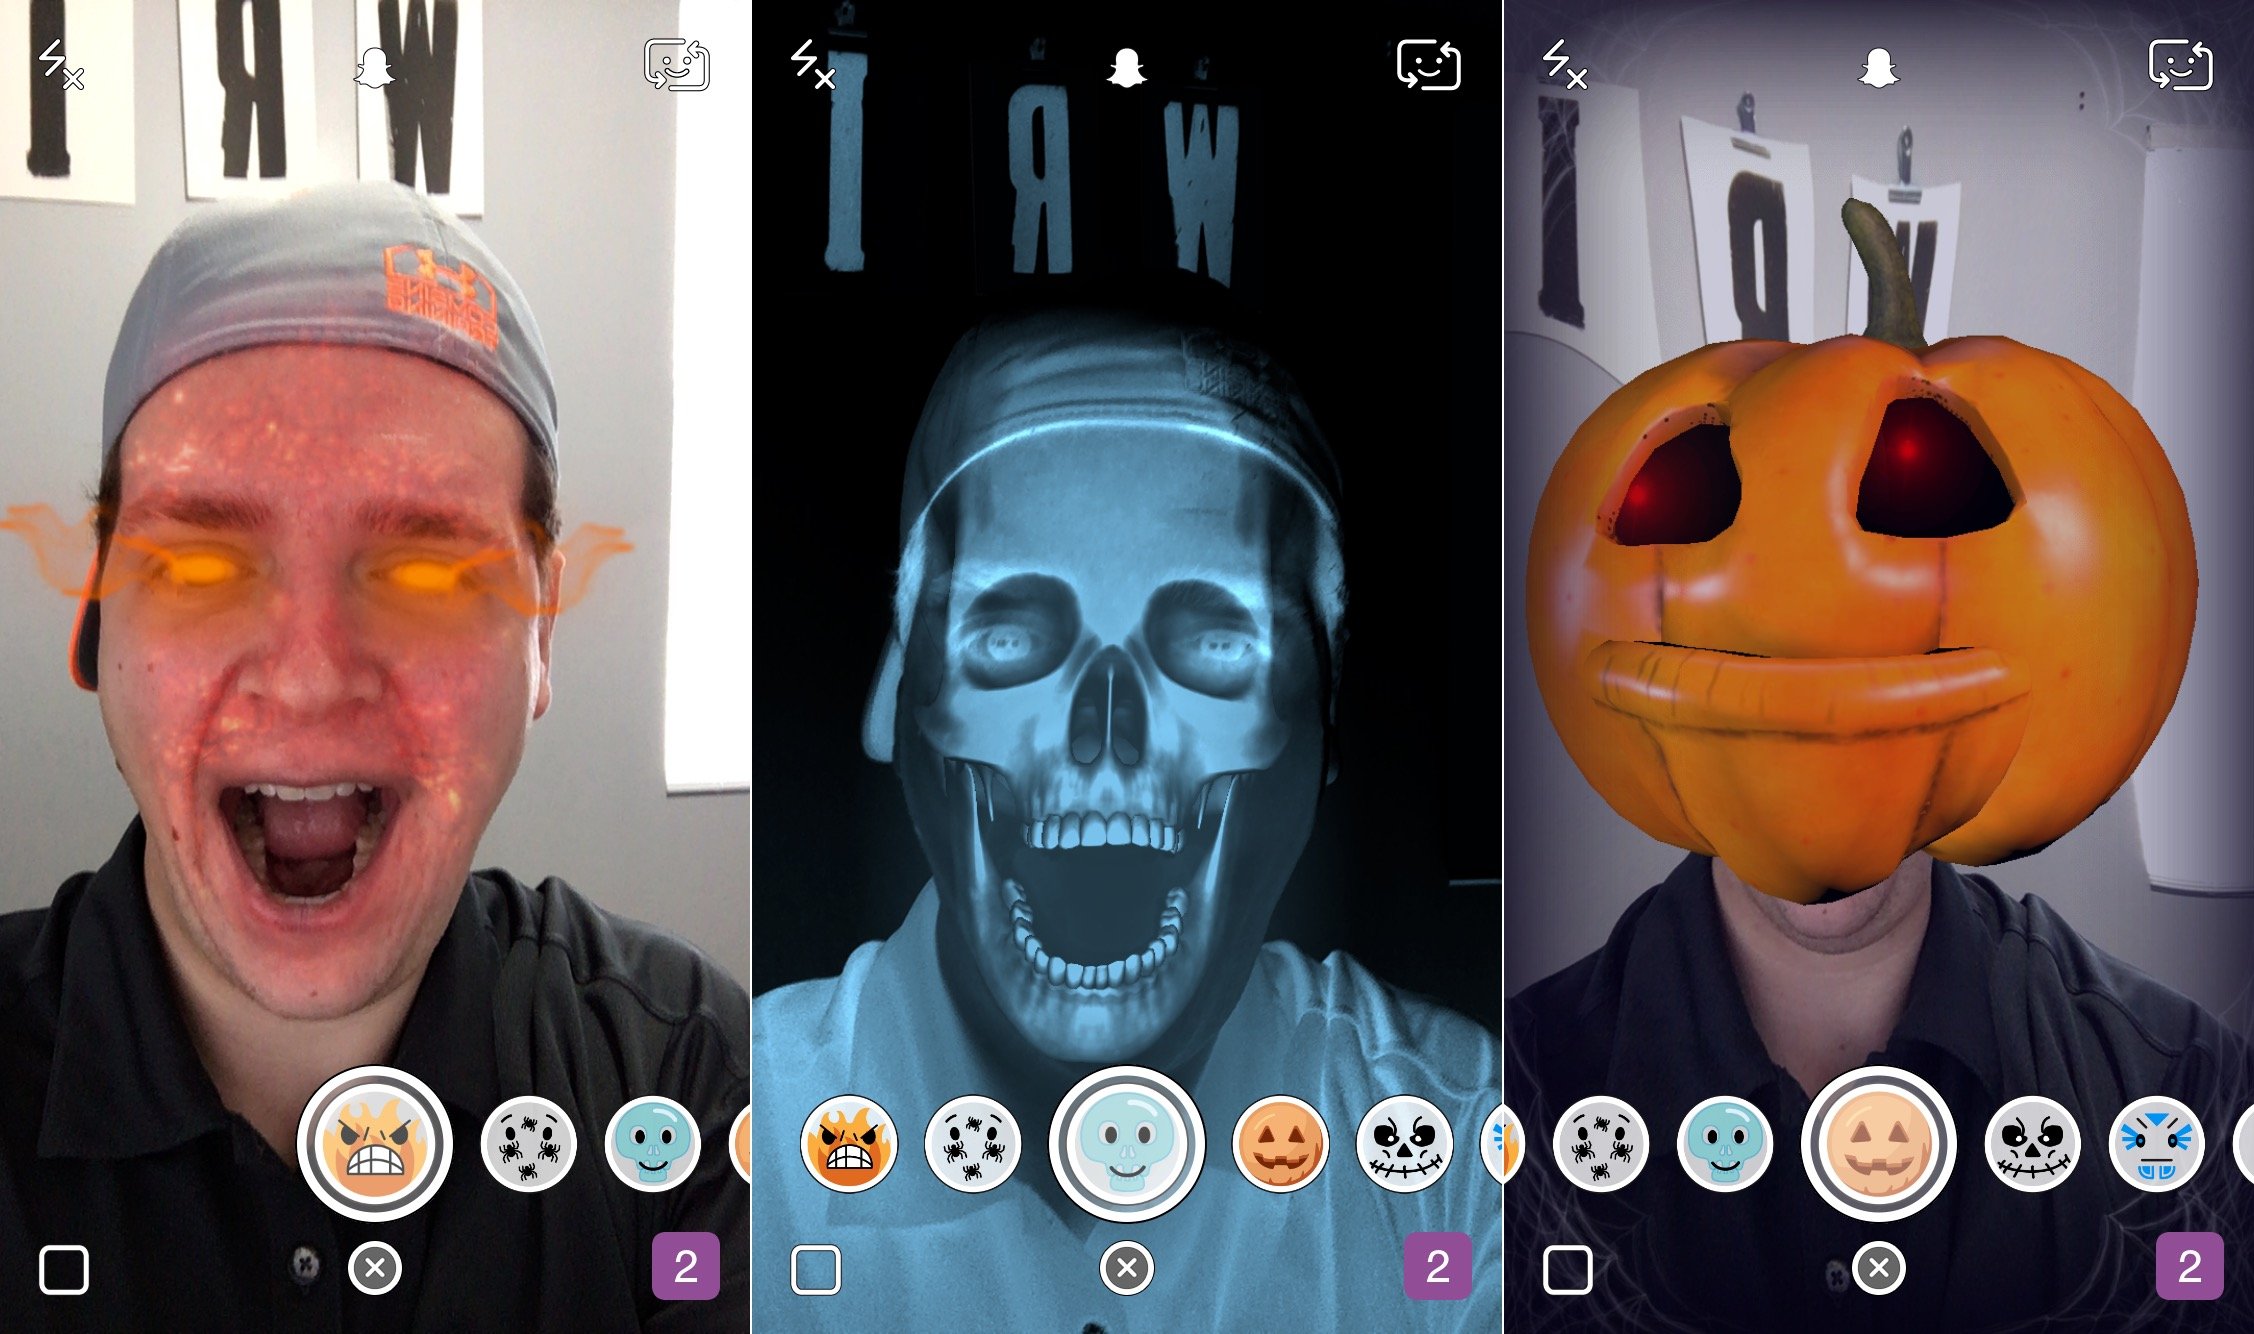 Did a scary Snapchat update allow Snapchat to save your photos? What you need to know.